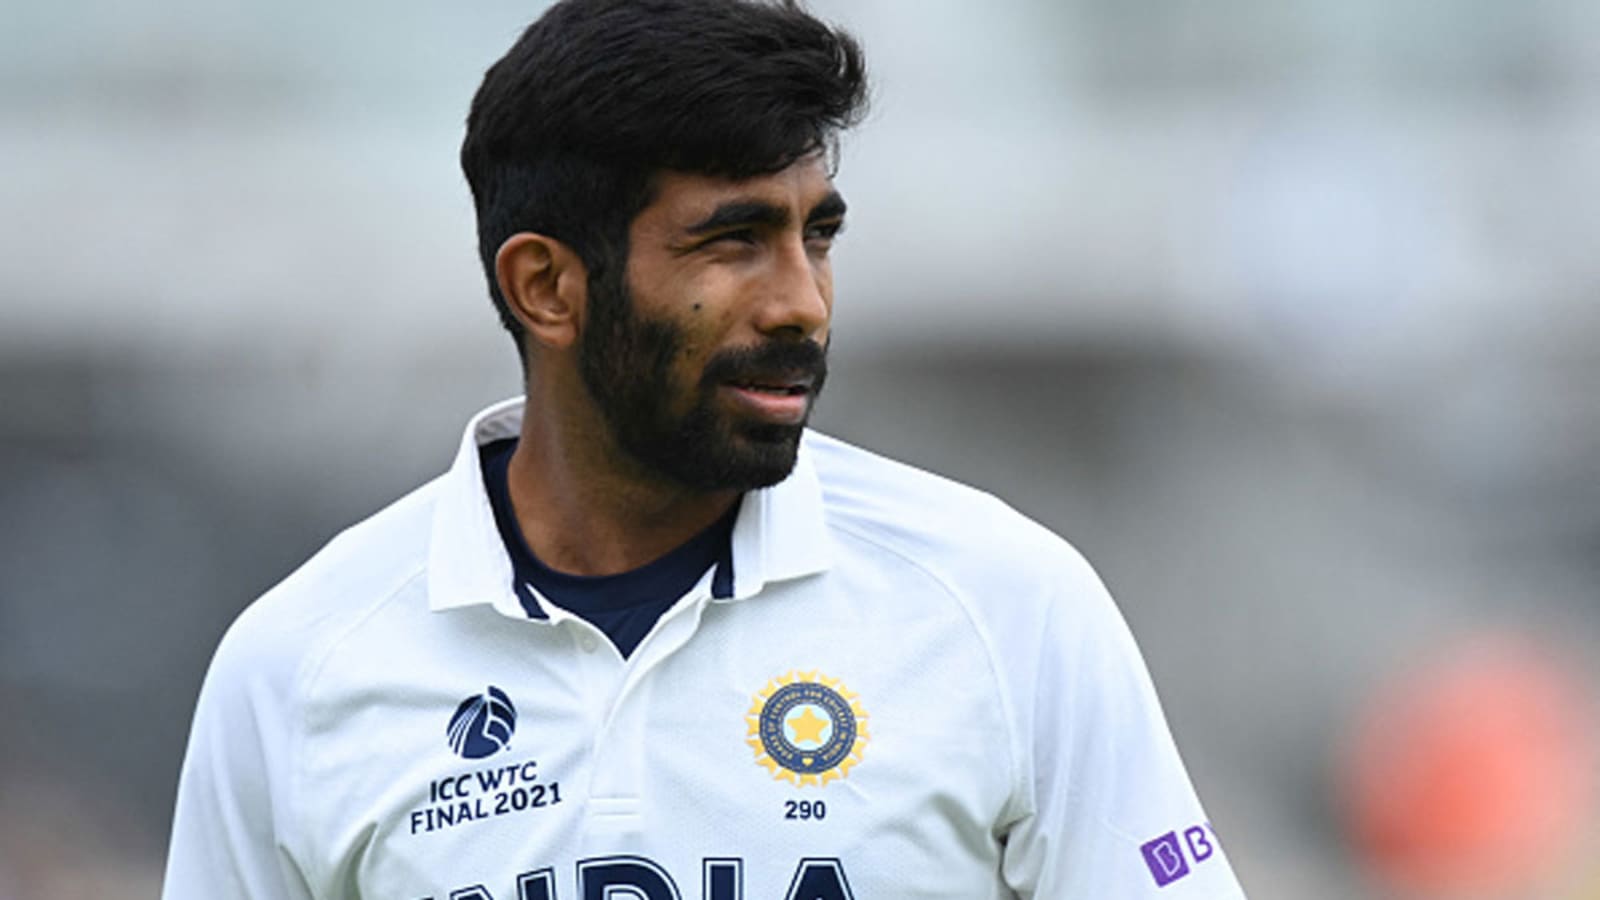 No wickets from Jasprit Bumrah was disappointing&#39;: Wasim Jaffer identifies &#39;big setback&#39; for Team India in WTC Final | Cricket - Hindustan Times